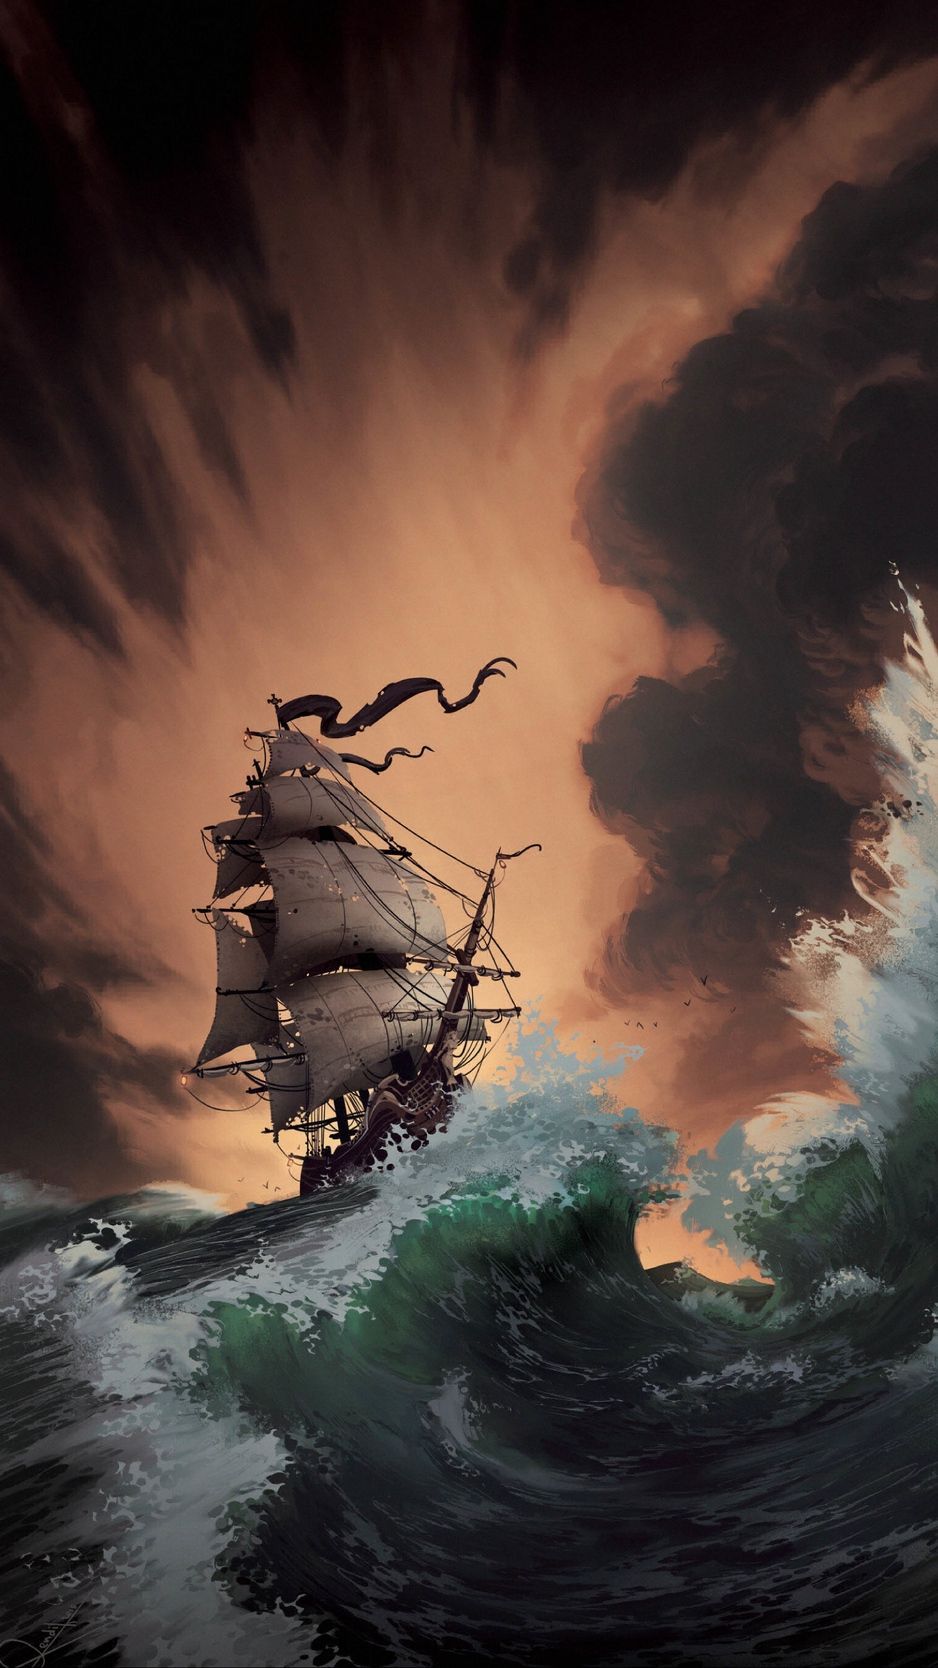 A ship in the middle of the sea during a storm - Pirate